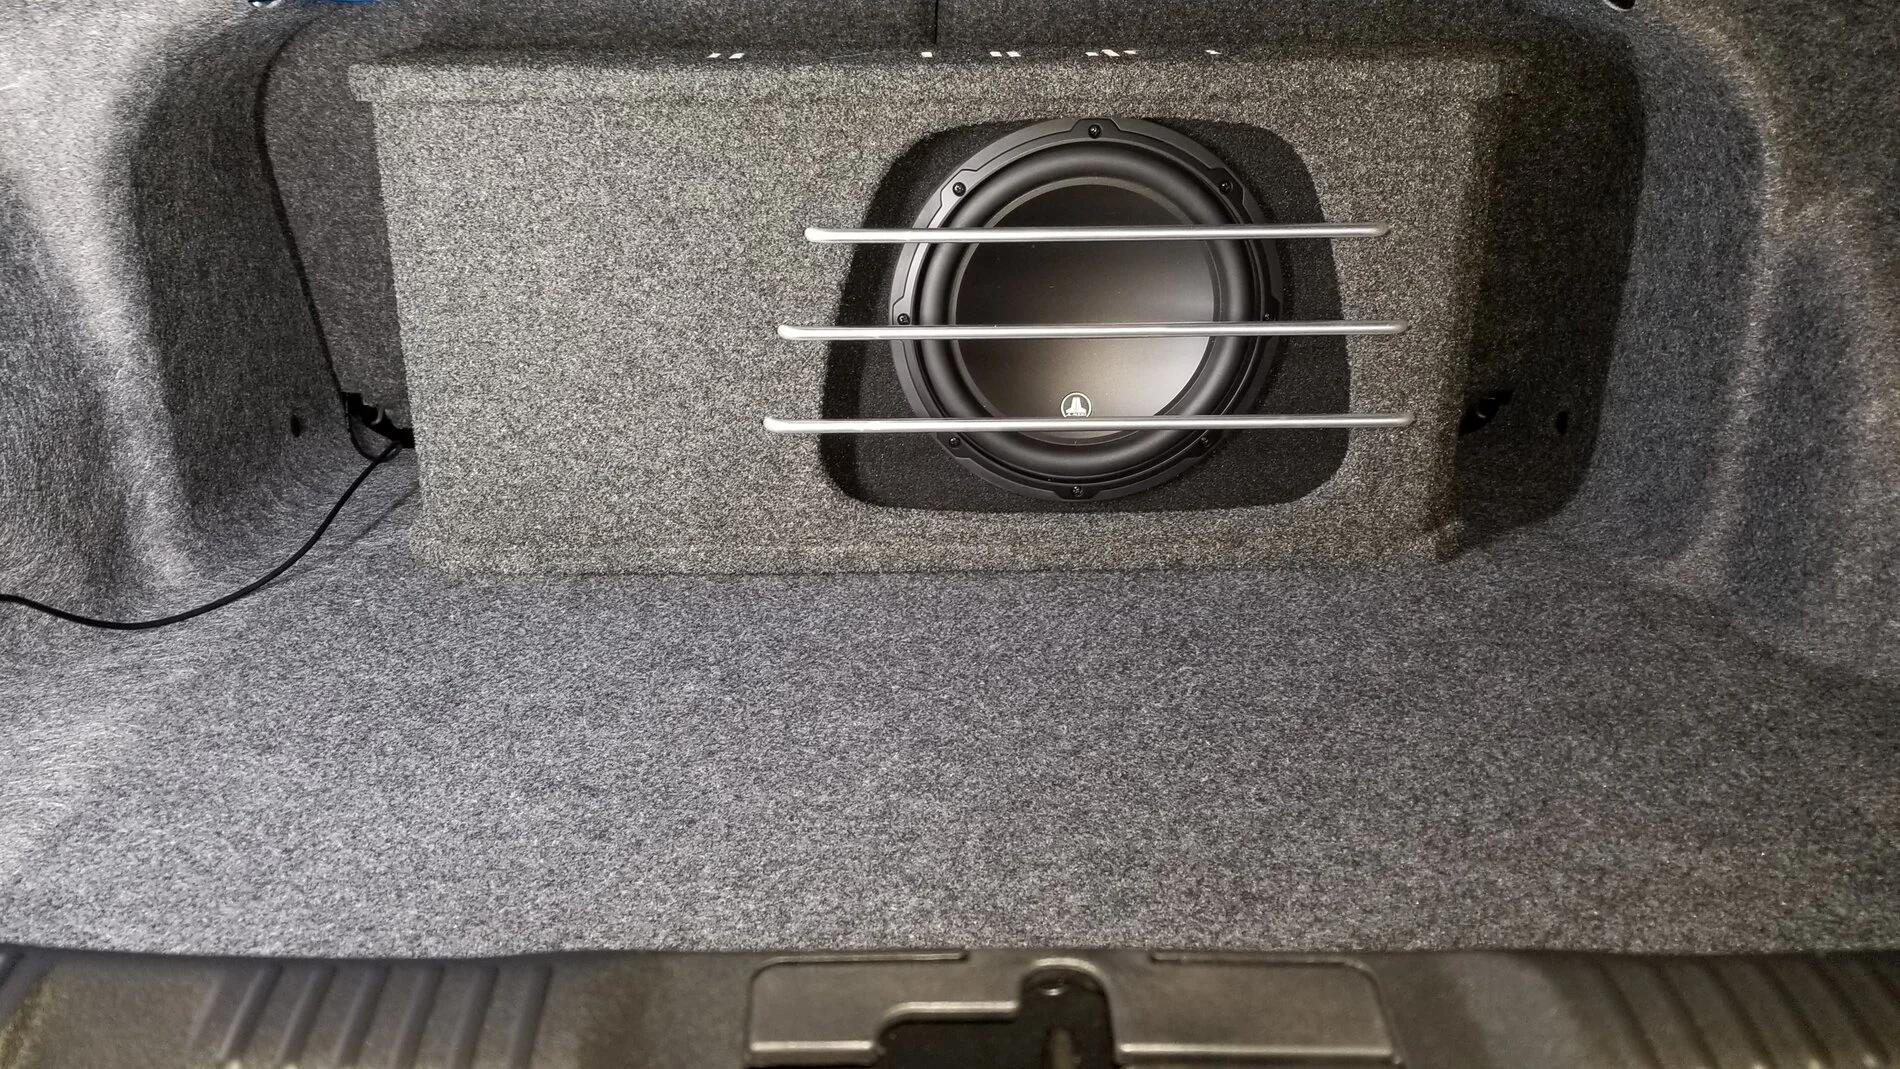 How To Secure Subwoofer Box In Trunk